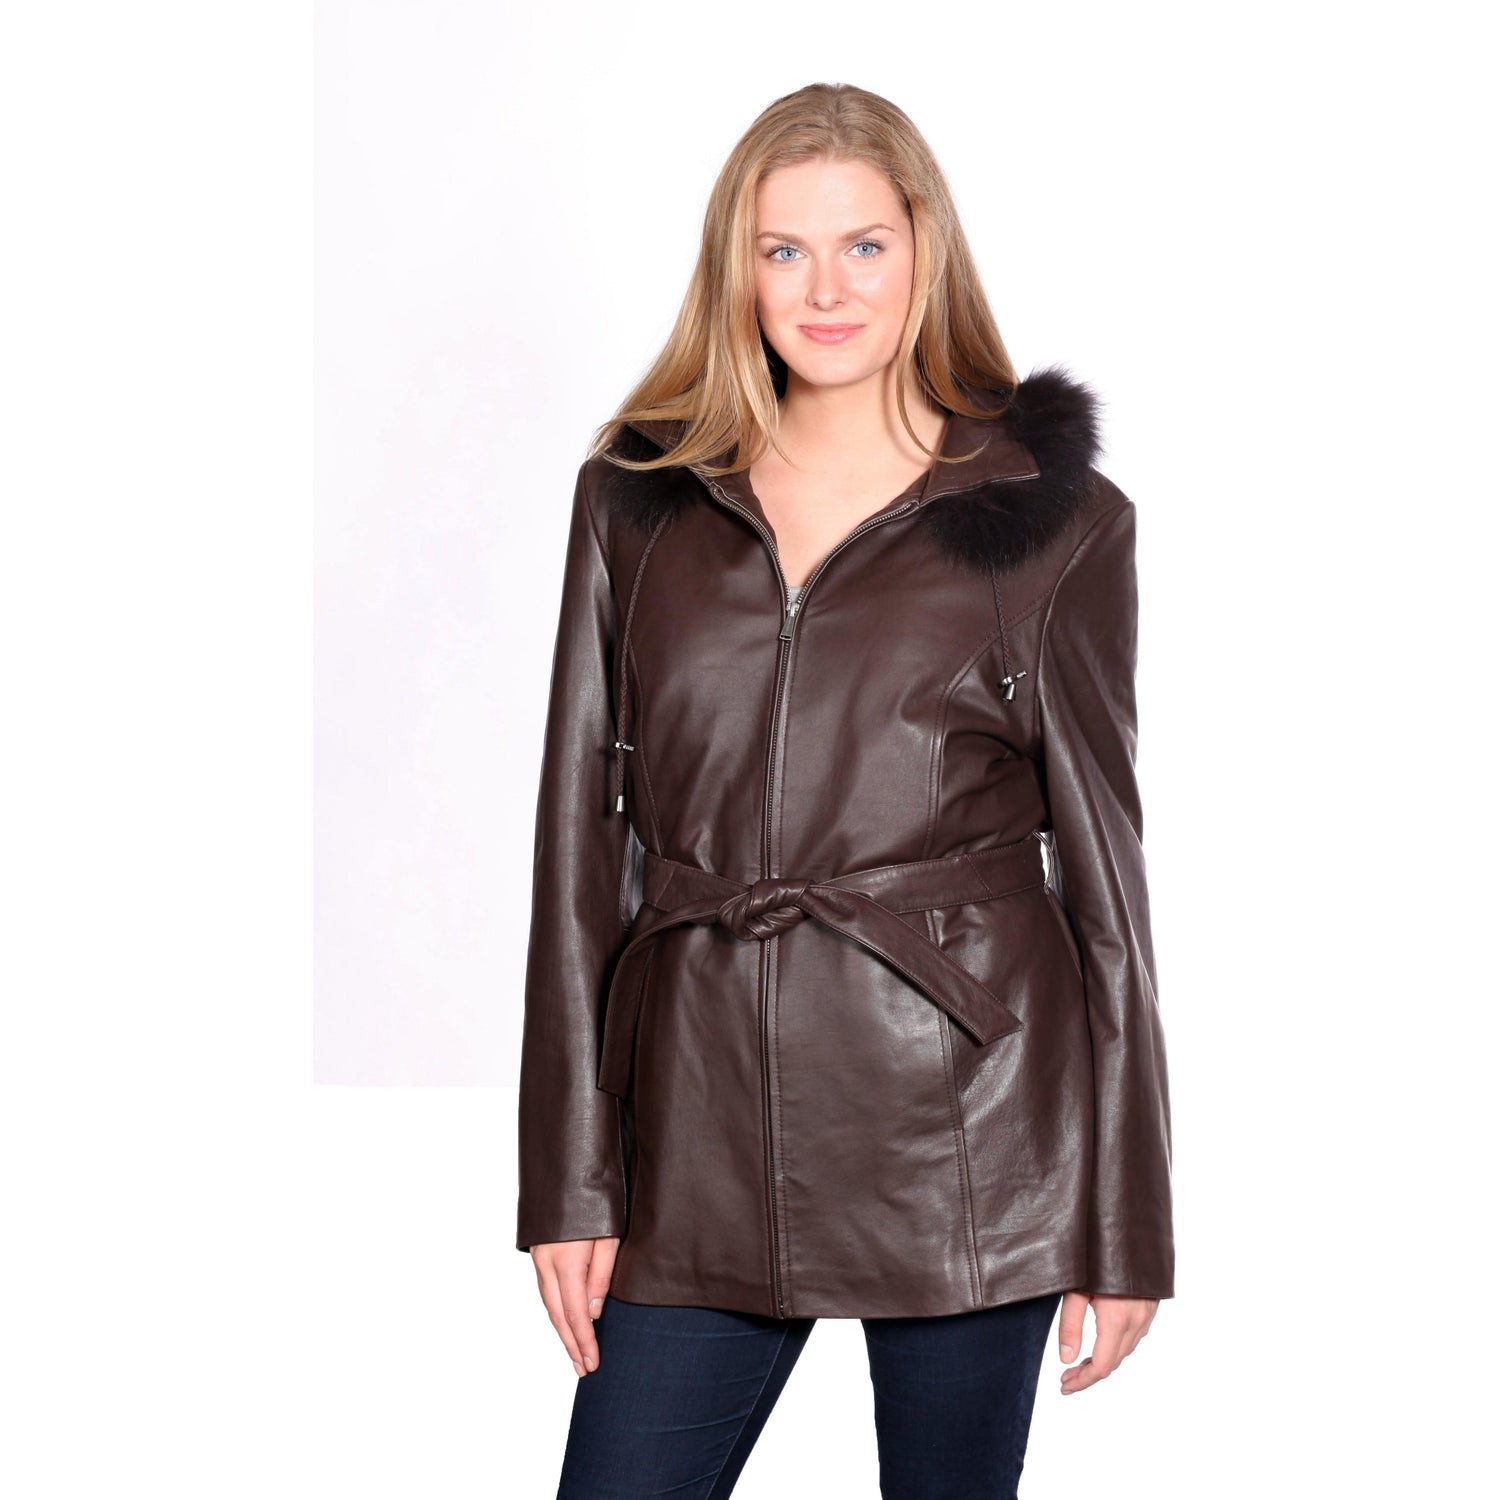 Mason & Cooper Women's Leather Jacket with Zip Out Hood